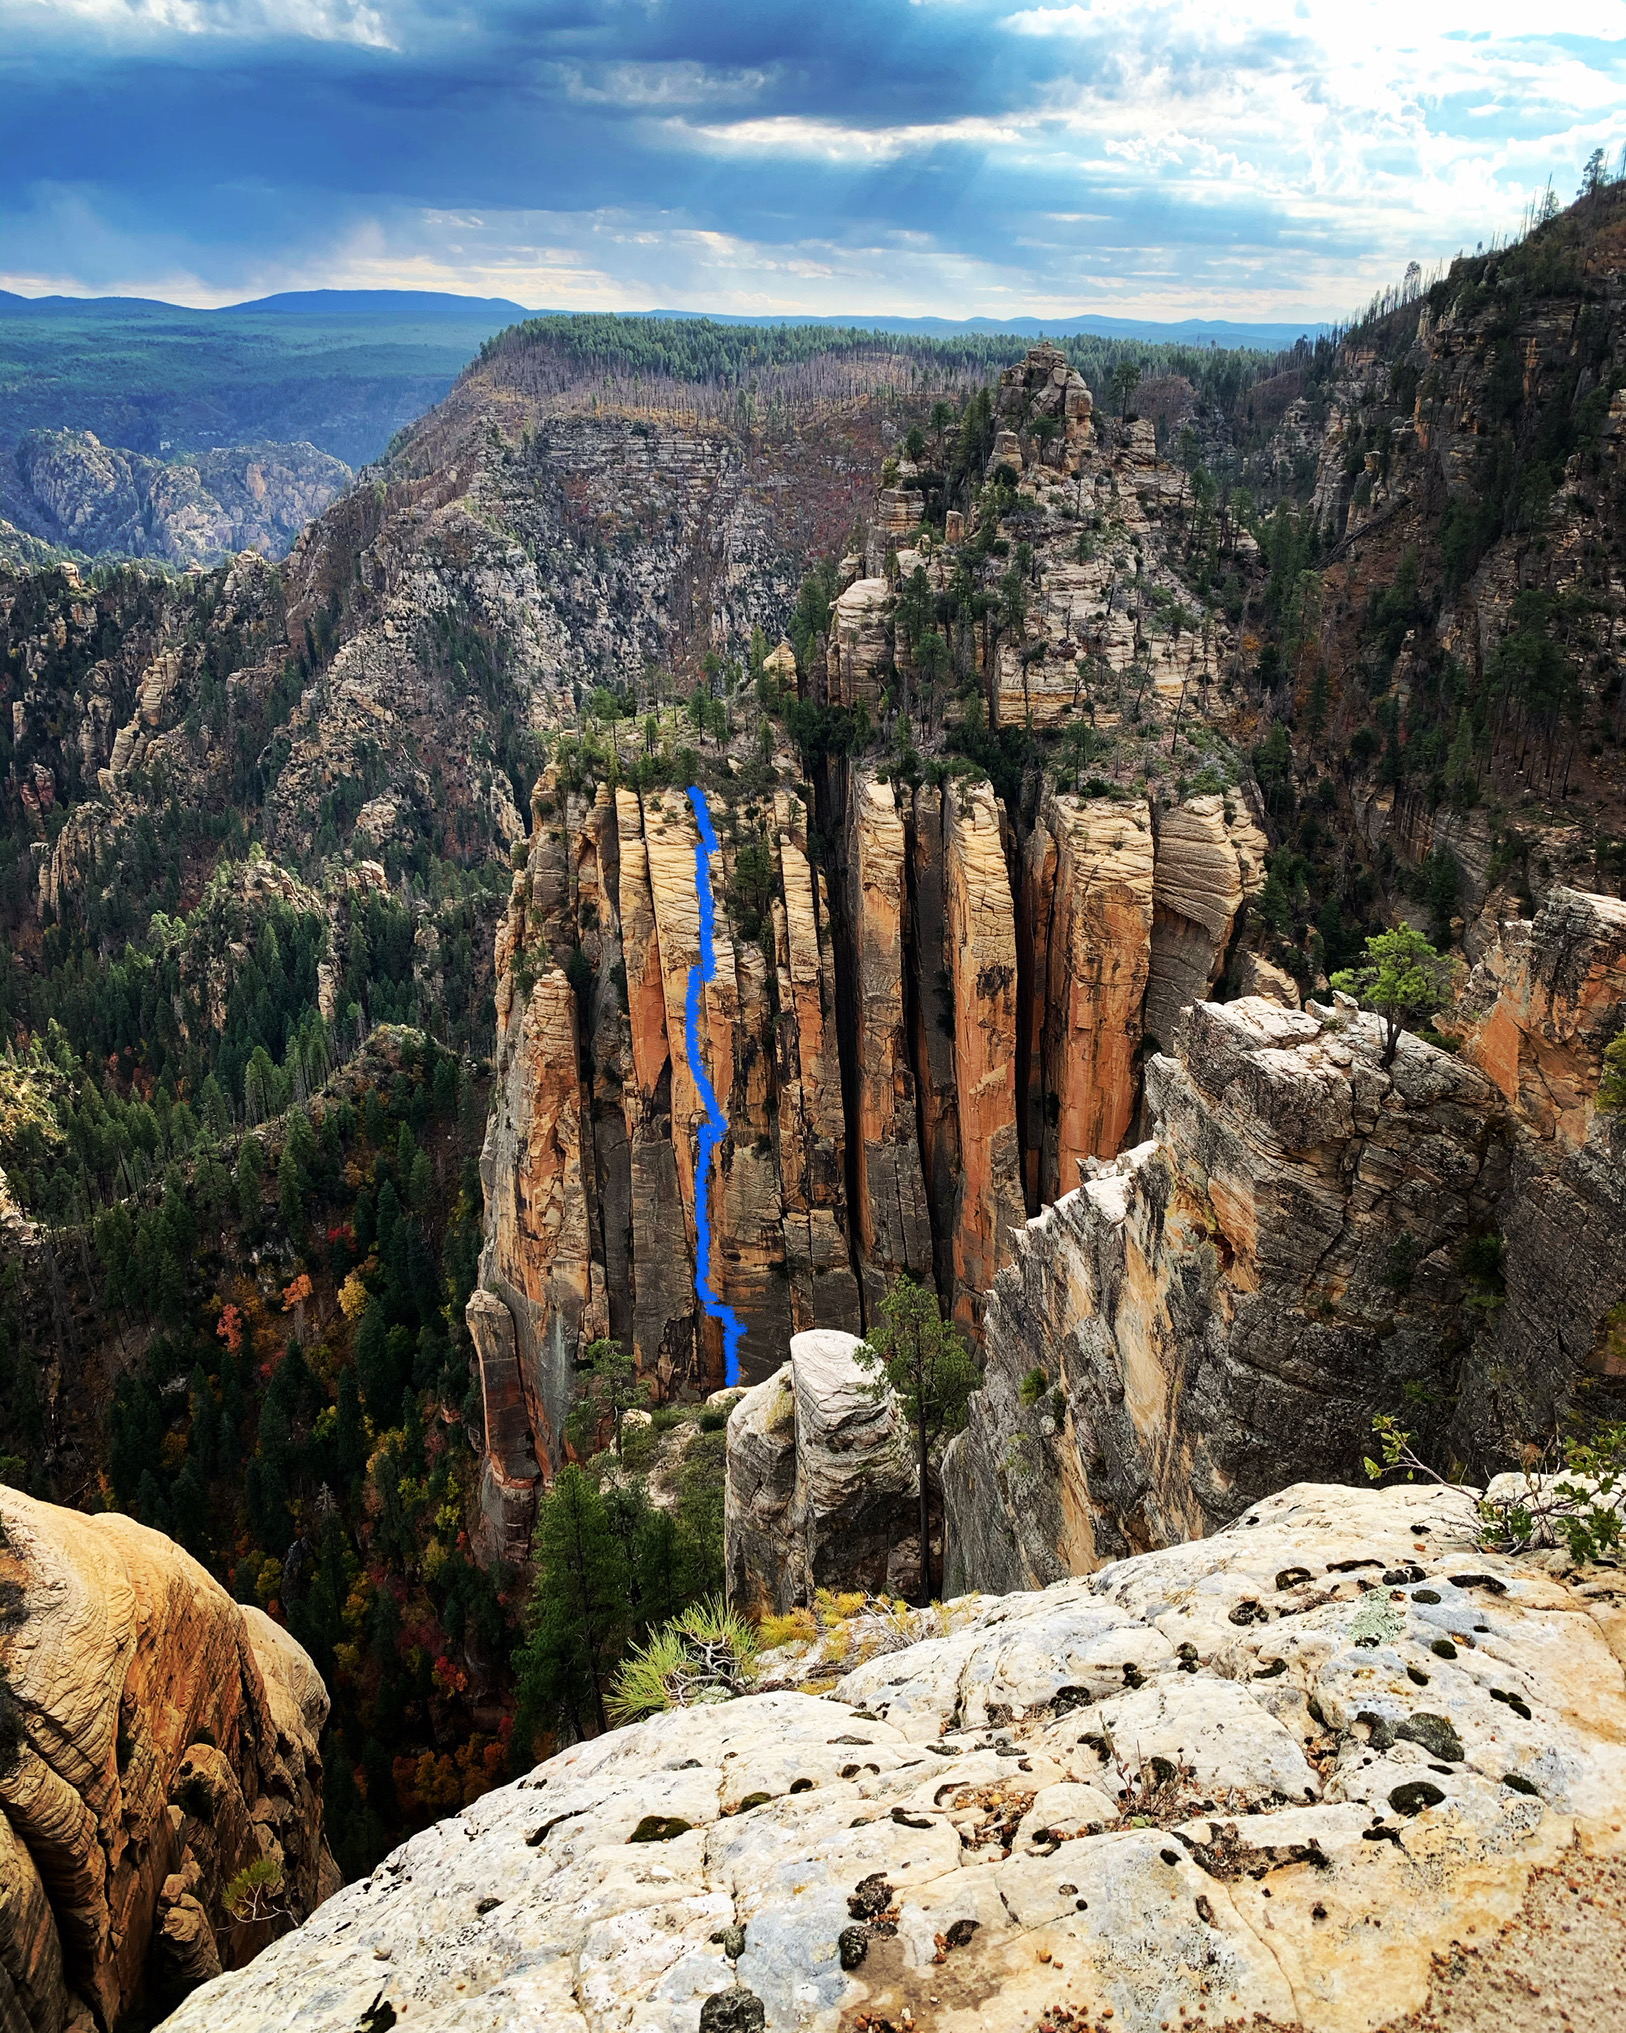 The approximate line of Cousin of Death (5.13+, 5 pitches) in northern Arizona. [Photo] Lor Sabourin